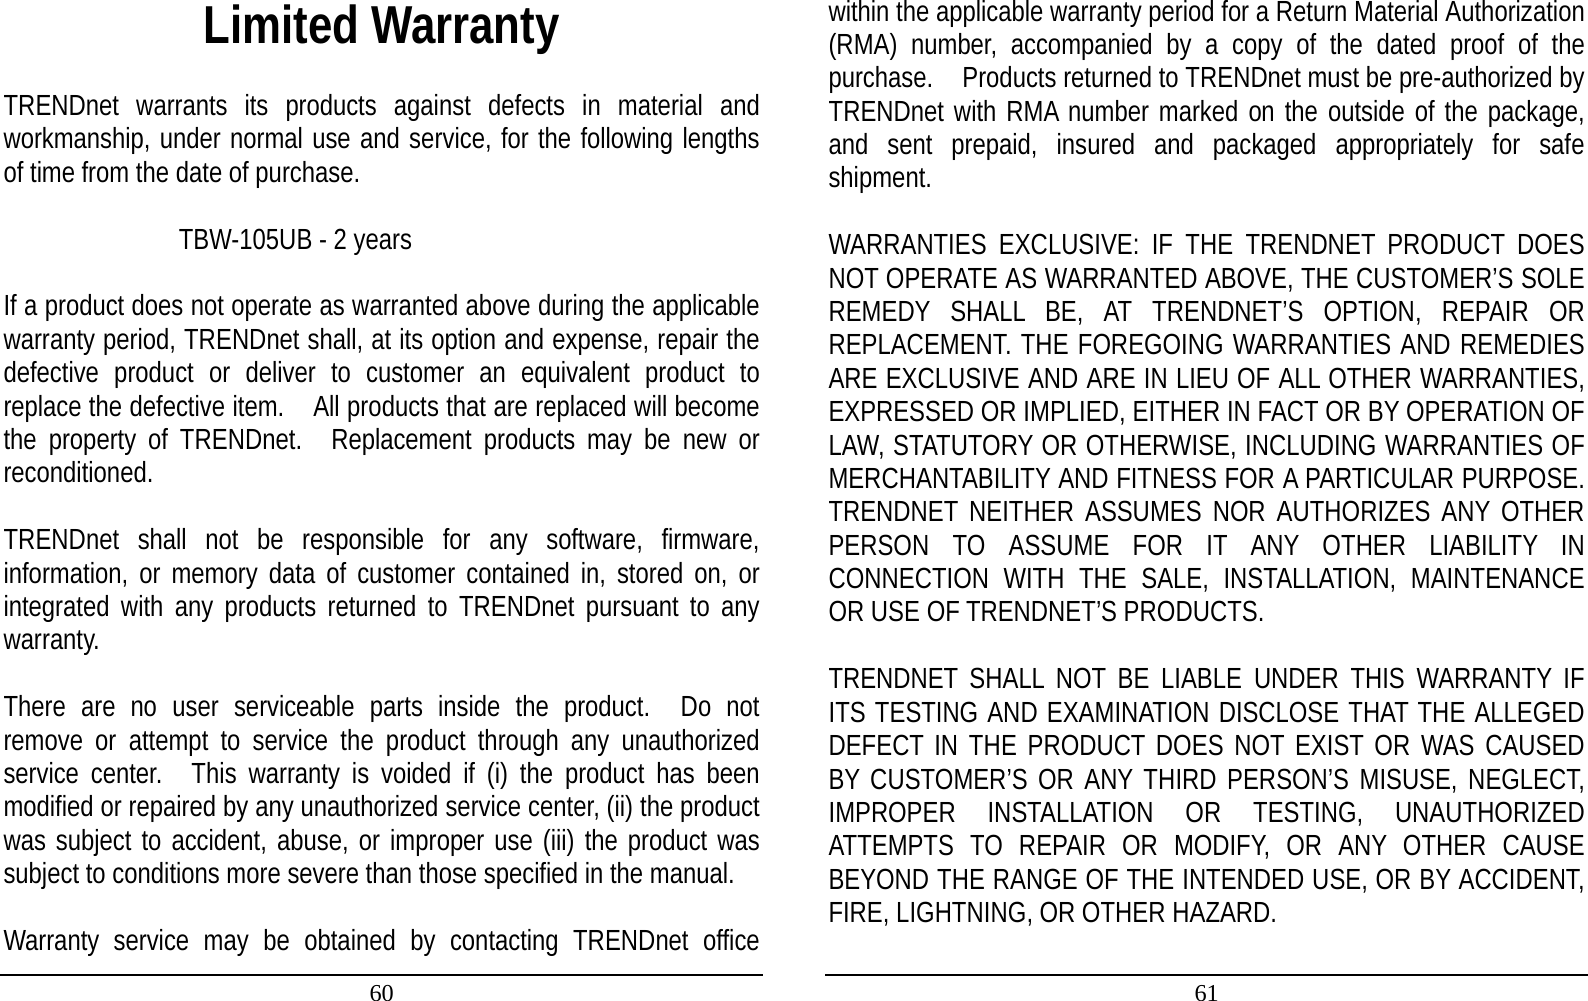 60 Limited Warranty  TRENDnet warrants its products against defects in material and workmanship, under normal use and service, for the following lengths of time from the date of purchase.         TBW-105UB - 2 years   If a product does not operate as warranted above during the applicable warranty period, TRENDnet shall, at its option and expense, repair the defective product or deliver to customer an equivalent product to replace the defective item.    All products that are replaced will become the property of TRENDnet.  Replacement products may be new or reconditioned.  TRENDnet shall not be responsible for any software, firmware, information, or memory data of customer contained in, stored on, or integrated with any products returned to TRENDnet pursuant to any warranty.  There are no user serviceable parts inside the product.  Do not remove or attempt to service the product through any unauthorized service center.  This warranty is voided if (i) the product has been modified or repaired by any unauthorized service center, (ii) the product was subject to accident, abuse, or improper use (iii) the product was subject to conditions more severe than those specified in the manual.  Warranty service may be obtained by contacting TRENDnet office 61 within the applicable warranty period for a Return Material Authorization (RMA) number, accompanied by a copy of the dated proof of the purchase.    Products returned to TRENDnet must be pre-authorized by TRENDnet with RMA number marked on the outside of the package, and sent prepaid, insured and packaged appropriately for safe shipment.    WARRANTIES EXCLUSIVE: IF THE TRENDNET PRODUCT DOES NOT OPERATE AS WARRANTED ABOVE, THE CUSTOMER’S SOLE REMEDY SHALL BE, AT TRENDNET’S OPTION, REPAIR OR REPLACEMENT. THE FOREGOING WARRANTIES AND REMEDIES ARE EXCLUSIVE AND ARE IN LIEU OF ALL OTHER WARRANTIES, EXPRESSED OR IMPLIED, EITHER IN FACT OR BY OPERATION OF LAW, STATUTORY OR OTHERWISE, INCLUDING WARRANTIES OF MERCHANTABILITY AND FITNESS FOR A PARTICULAR PURPOSE. TRENDNET NEITHER ASSUMES NOR AUTHORIZES ANY OTHER PERSON TO ASSUME FOR IT ANY OTHER LIABILITY IN CONNECTION WITH THE SALE, INSTALLATION, MAINTENANCE OR USE OF TRENDNET’S PRODUCTS.  TRENDNET SHALL NOT BE LIABLE UNDER THIS WARRANTY IF ITS TESTING AND EXAMINATION DISCLOSE THAT THE ALLEGED DEFECT IN THE PRODUCT DOES NOT EXIST OR WAS CAUSED BY CUSTOMER’S OR ANY THIRD PERSON’S MISUSE, NEGLECT, IMPROPER INSTALLATION OR TESTING, UNAUTHORIZED ATTEMPTS TO REPAIR OR MODIFY, OR ANY OTHER CAUSE BEYOND THE RANGE OF THE INTENDED USE, OR BY ACCIDENT, FIRE, LIGHTNING, OR OTHER HAZARD.  